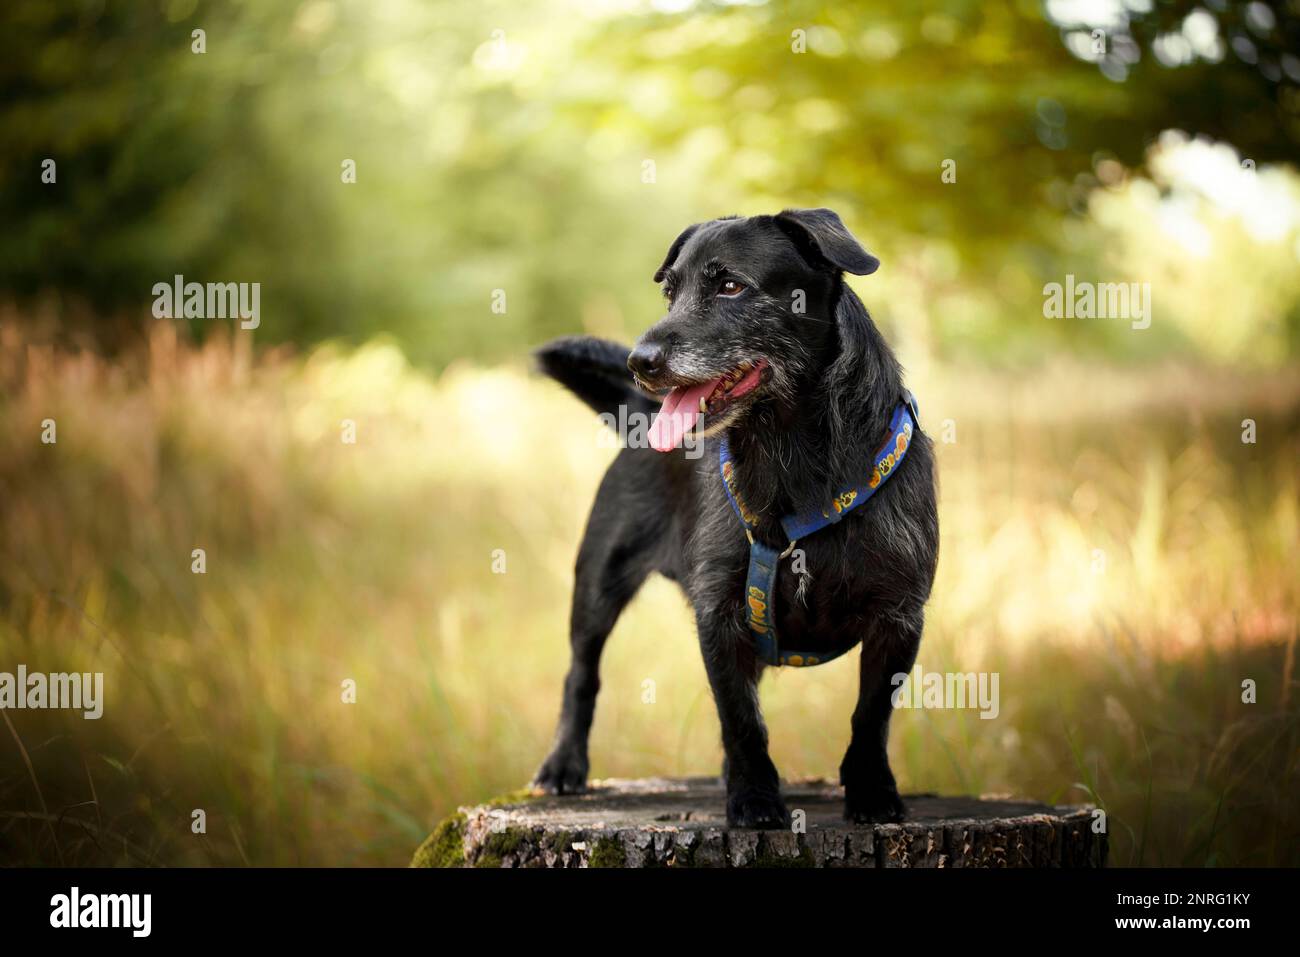 An older dog walking through the woods in spring weather. Stock Photo